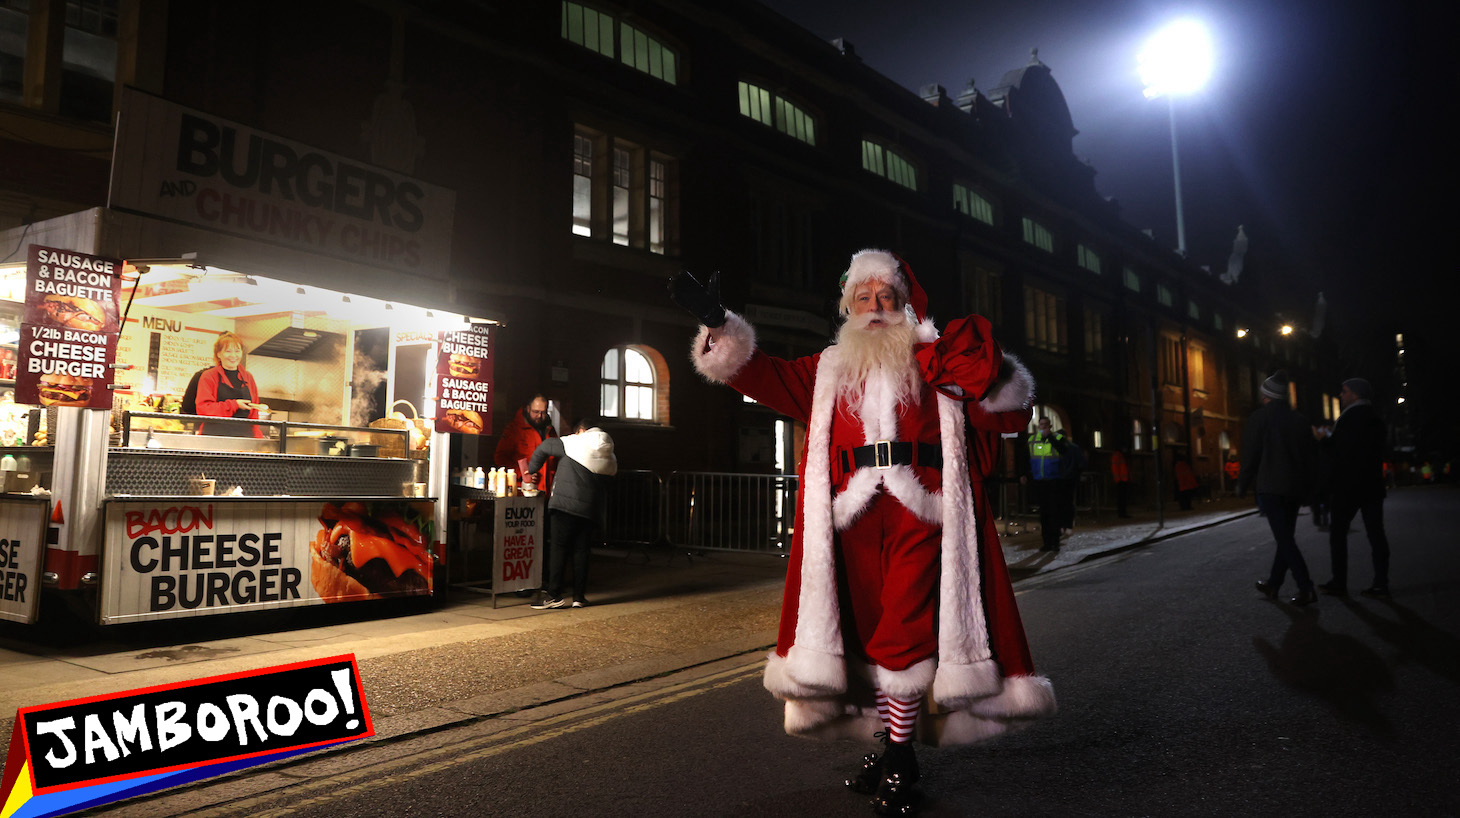 LONDON, ENGLAND - DECEMBER 20: A man dressed as Santa Claus is pictured outside the stadium prior to the Sky Bet Championship match between Fulham and Sheffield United at Craven Cottage on December 20, 2021 in London, England. (Photo by Alex Pantling/Getty Images)